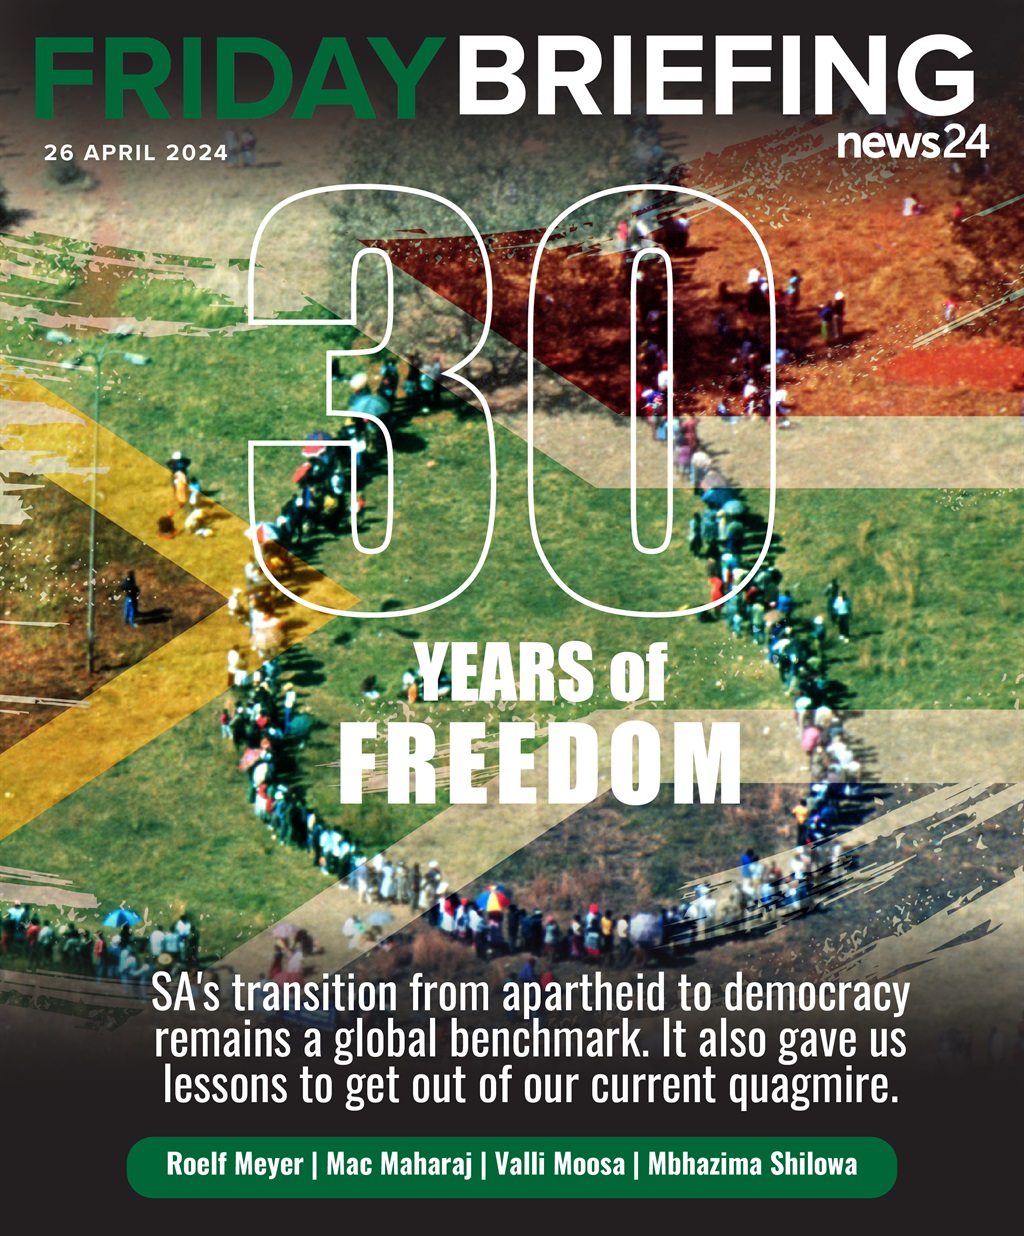 News24 | FRIDAY BRIEFING | 30 years of freedom: A reflection on three decades of democracy